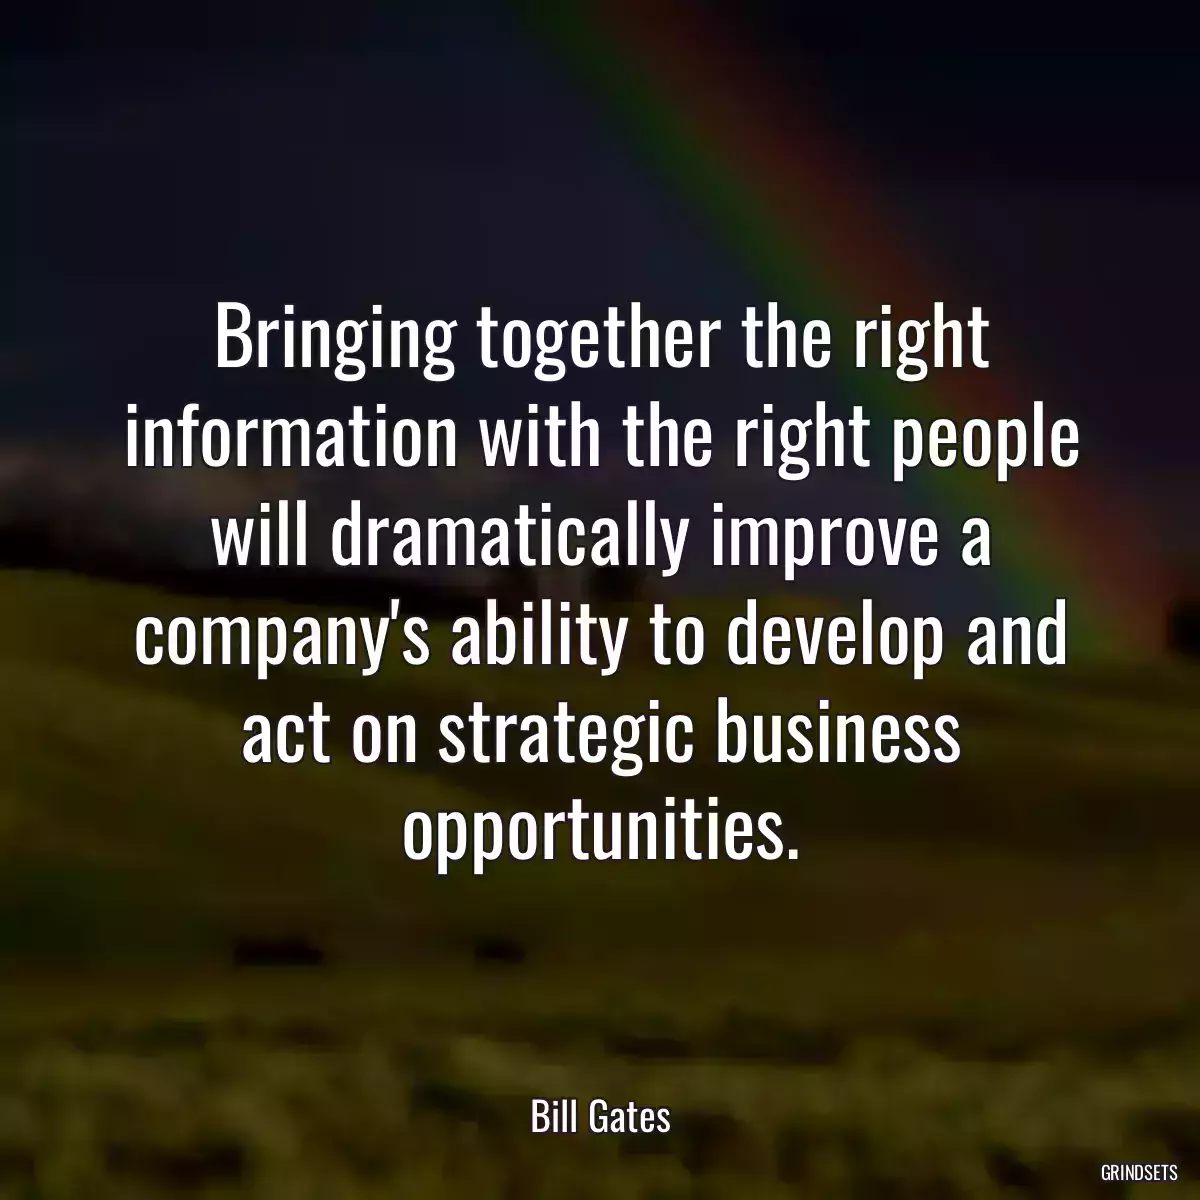 Bringing together the right information with the right people will dramatically improve a company\'s ability to develop and act on strategic business opportunities.